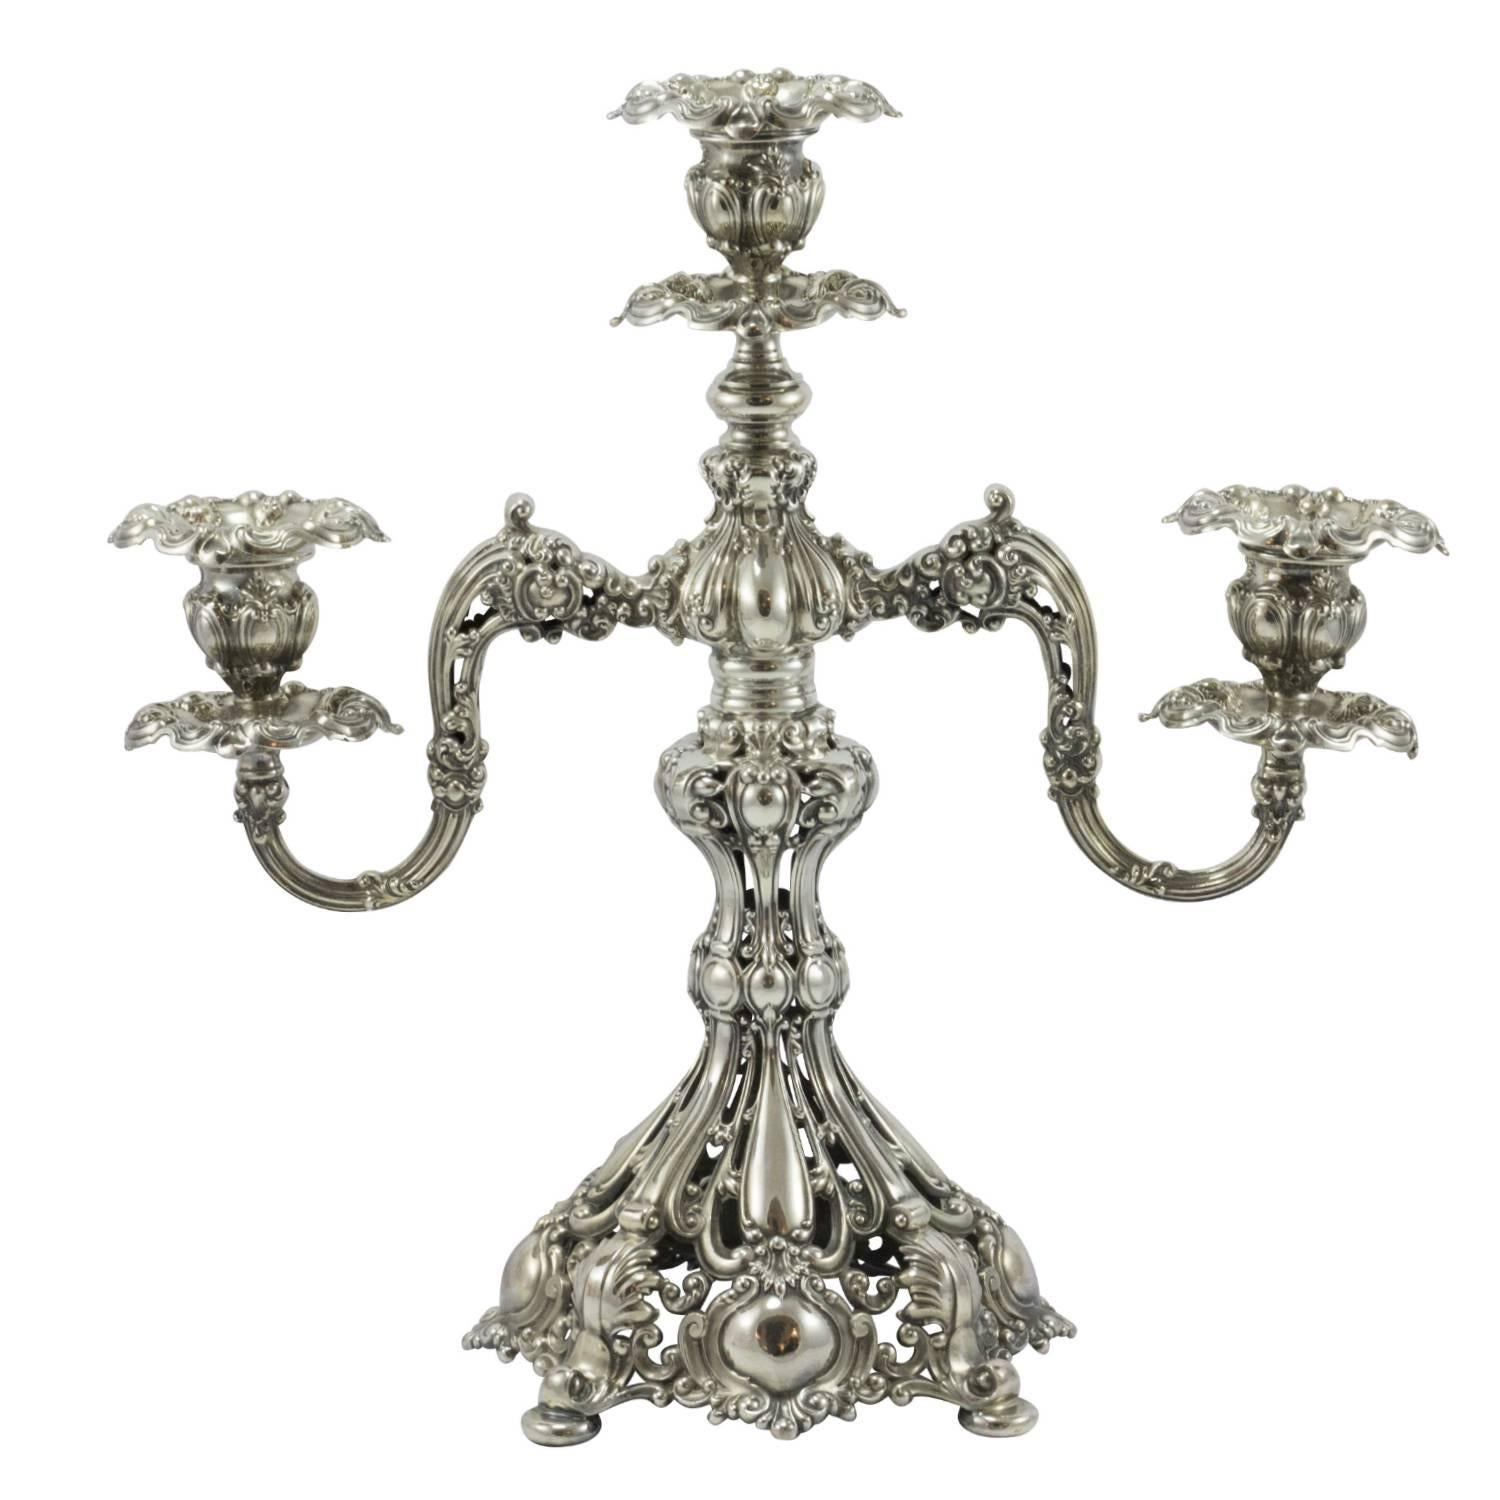 A pair of late 19th century silver plate three-arm candelabras in the Renaissance pattern by Reed and Barton.